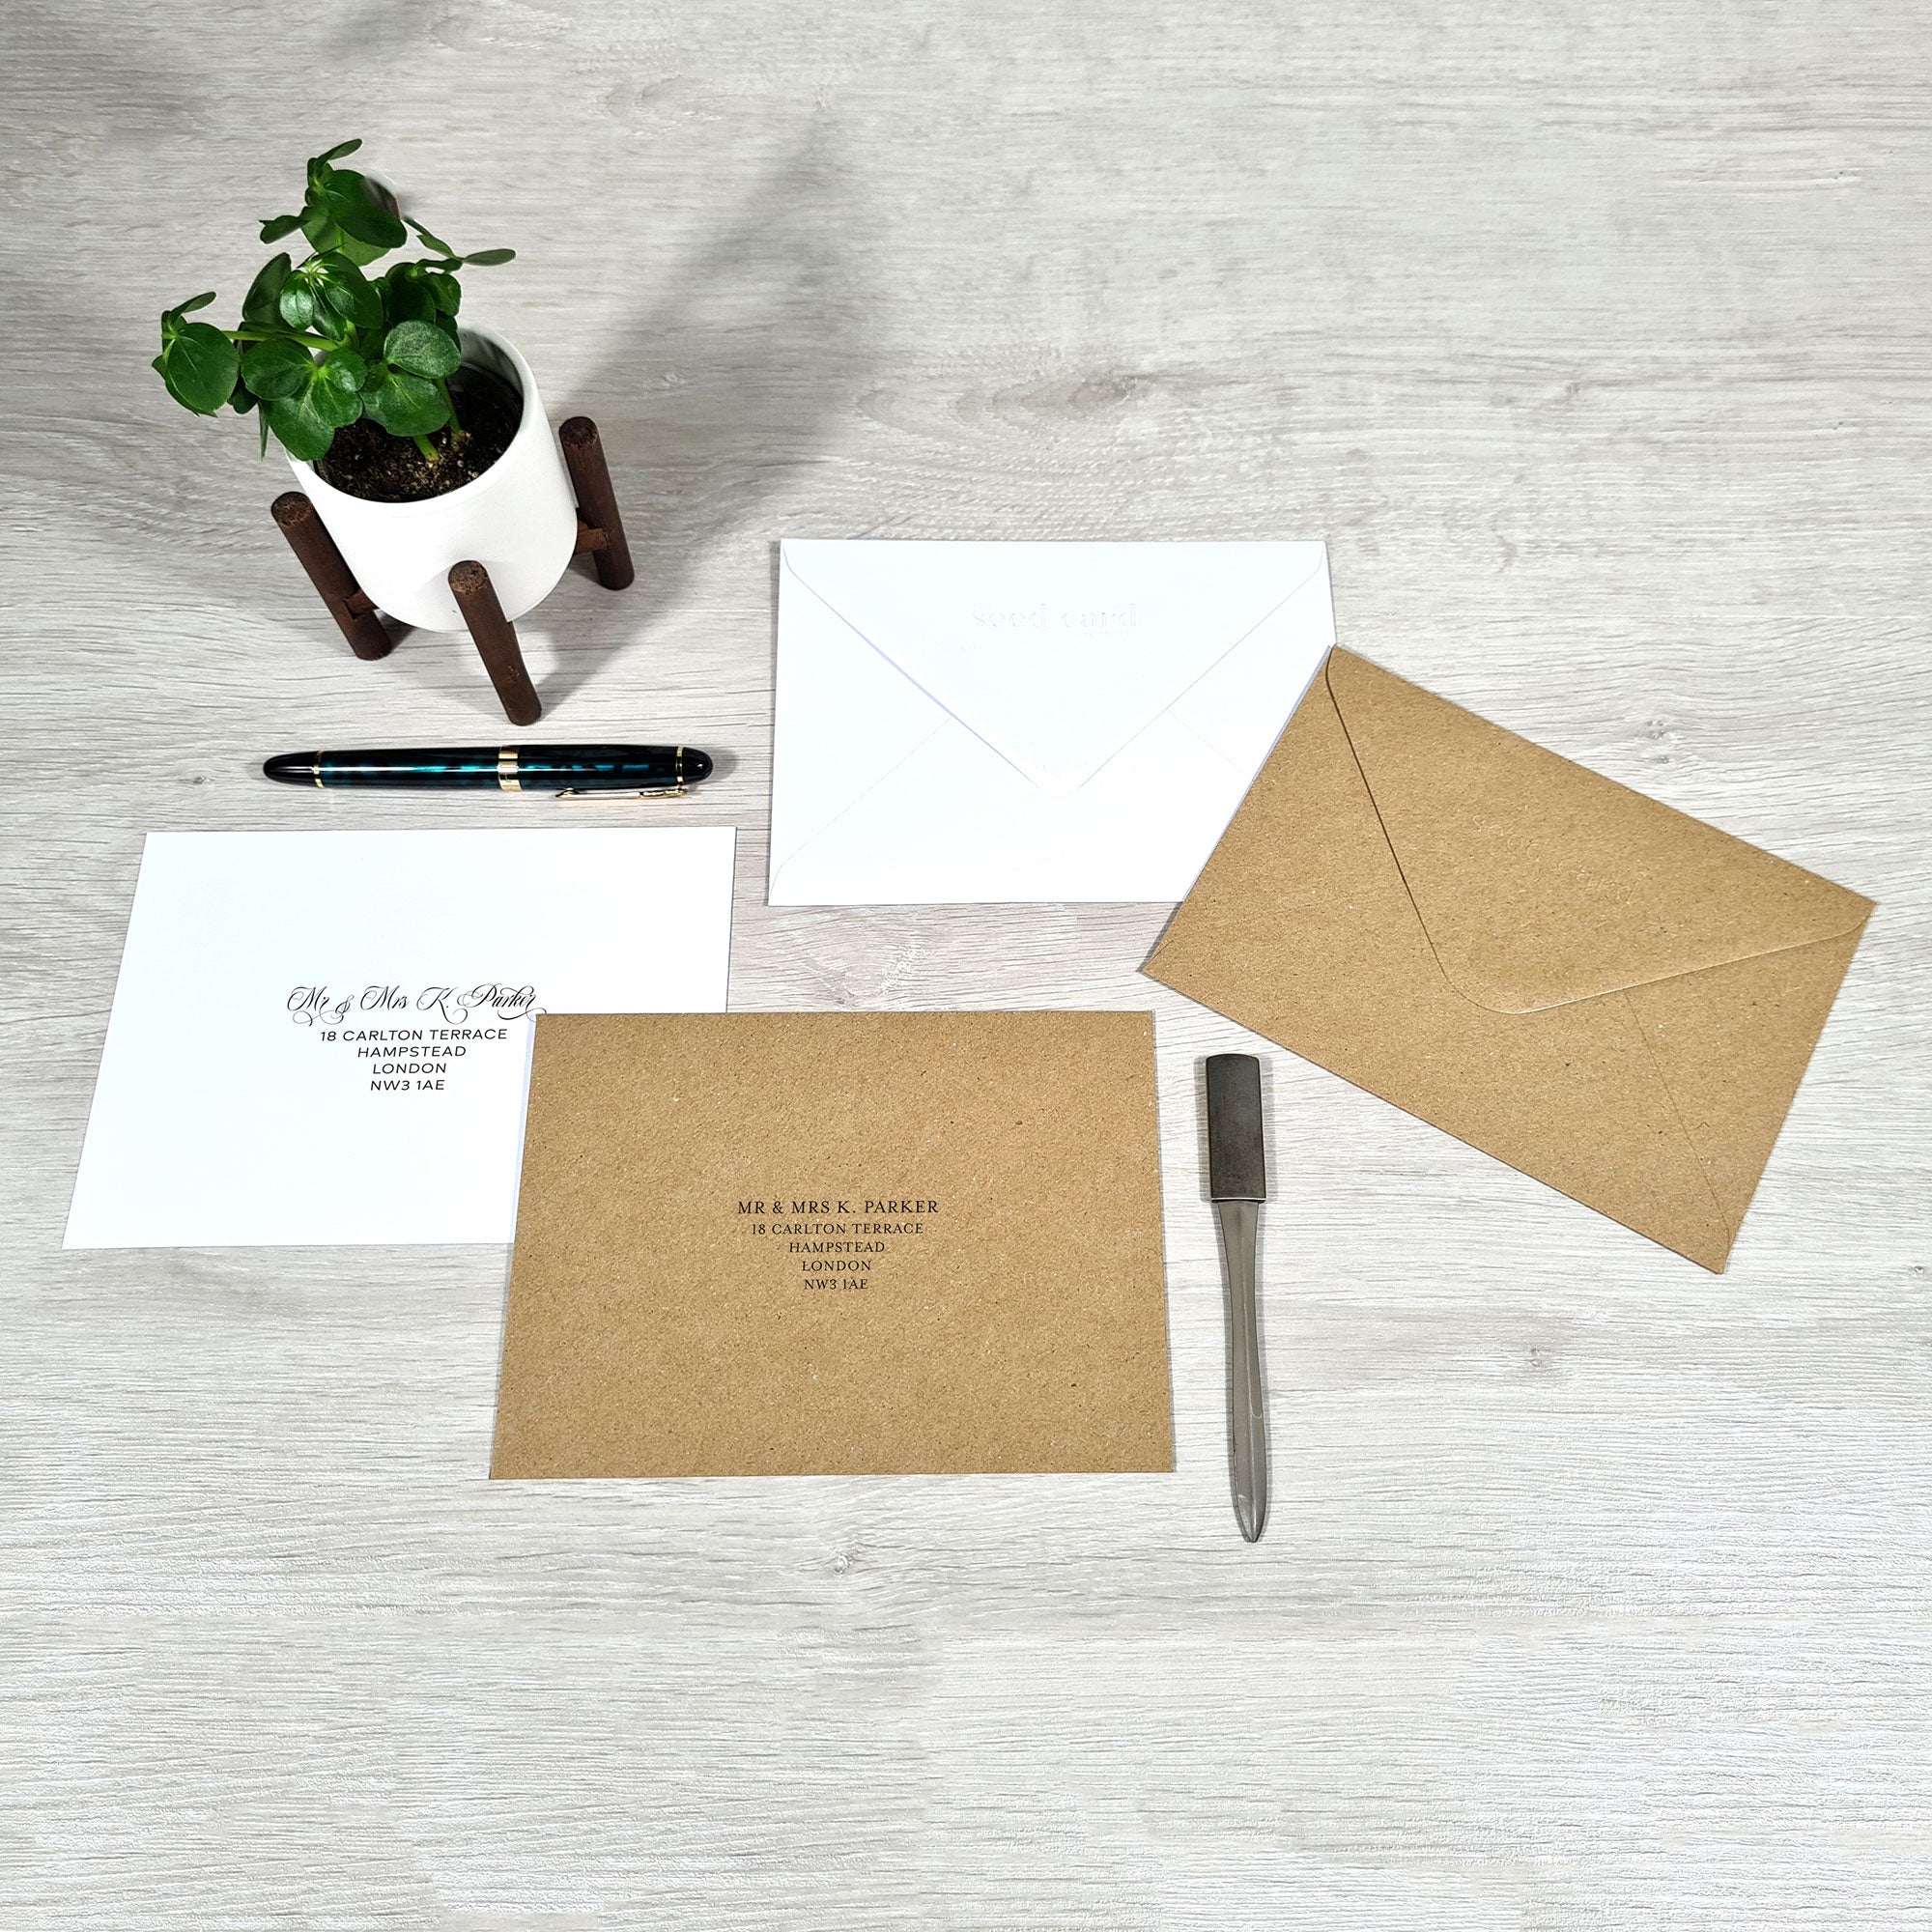 Shop online Monochrome - 100% biodegradable seed-embedded cards Shop -The Seed Card Company